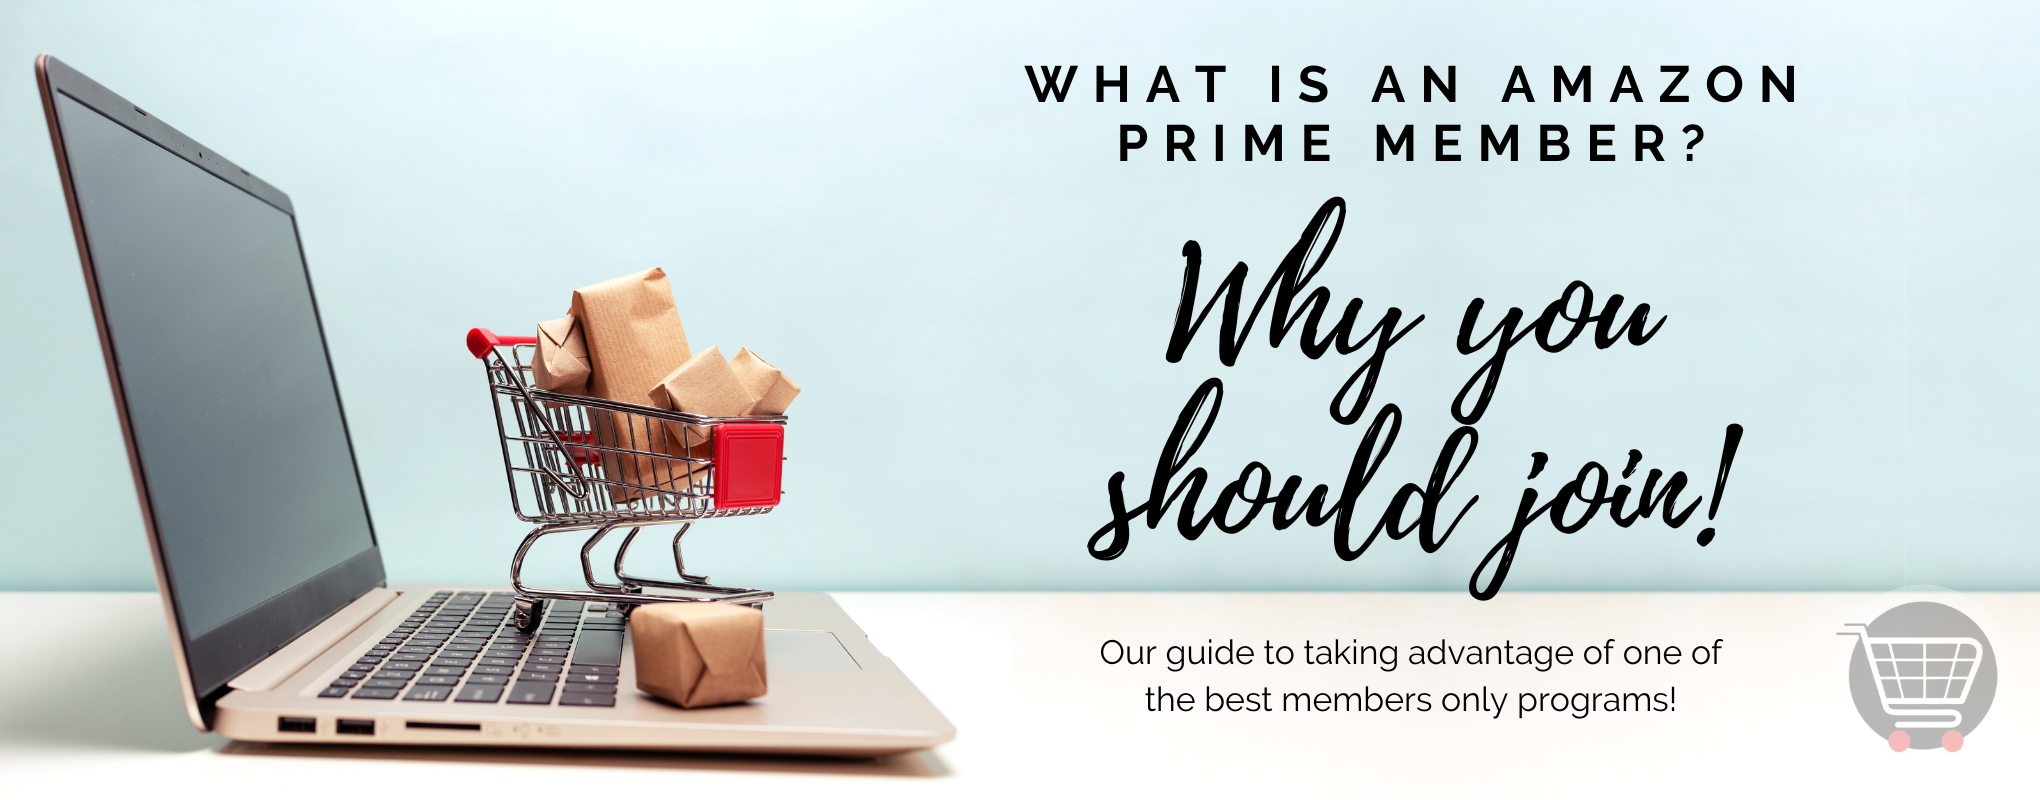 What Is An Amazon Prime Member And Why You Should Join!